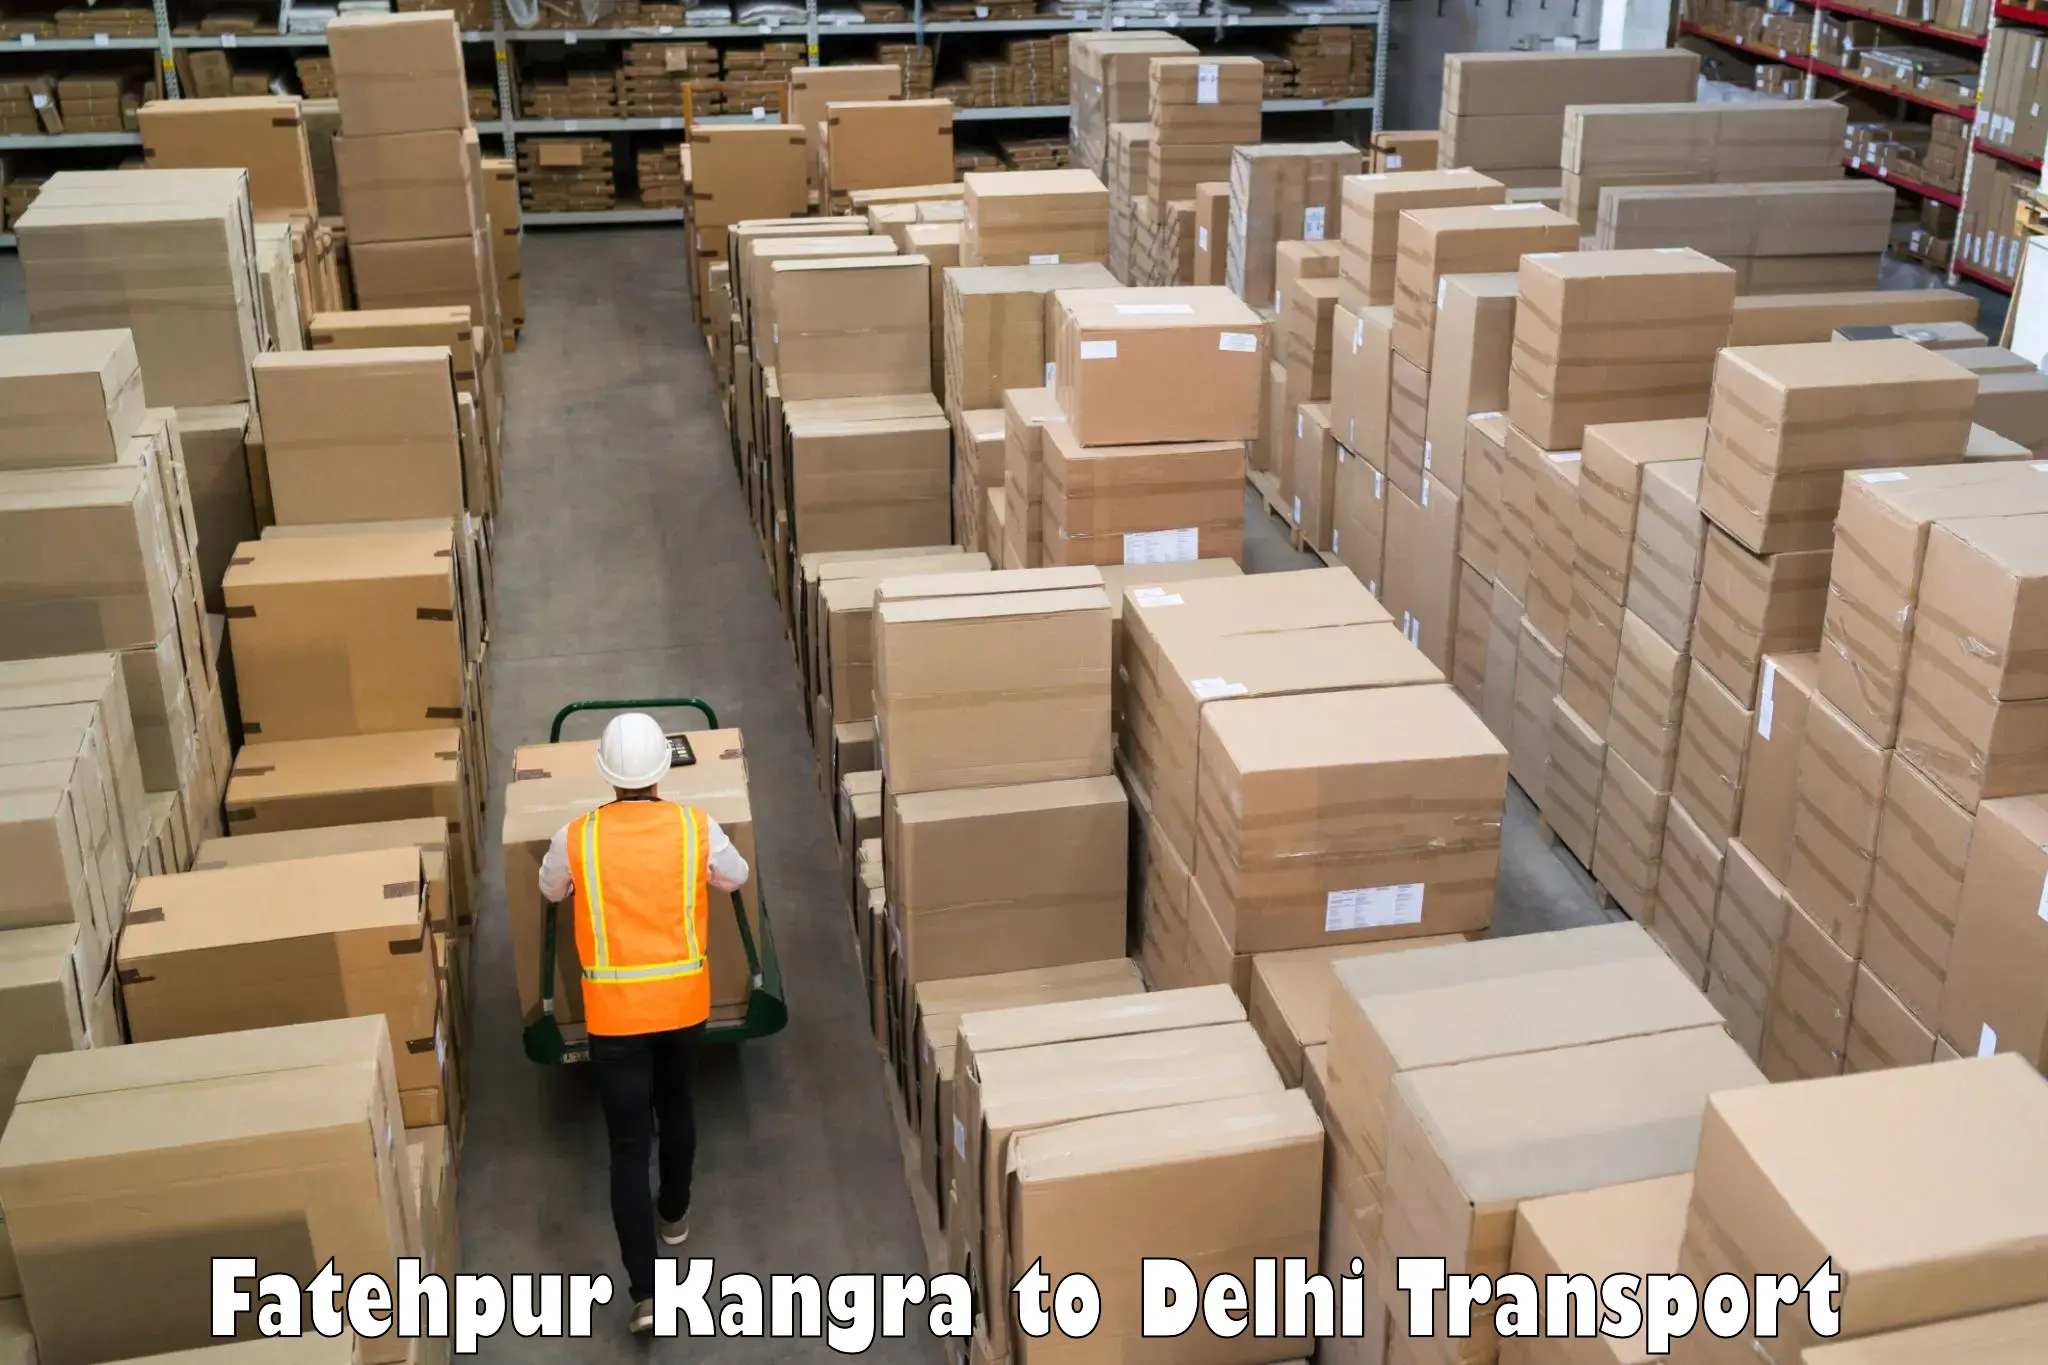 Parcel transport services Fatehpur Kangra to Lodhi Road